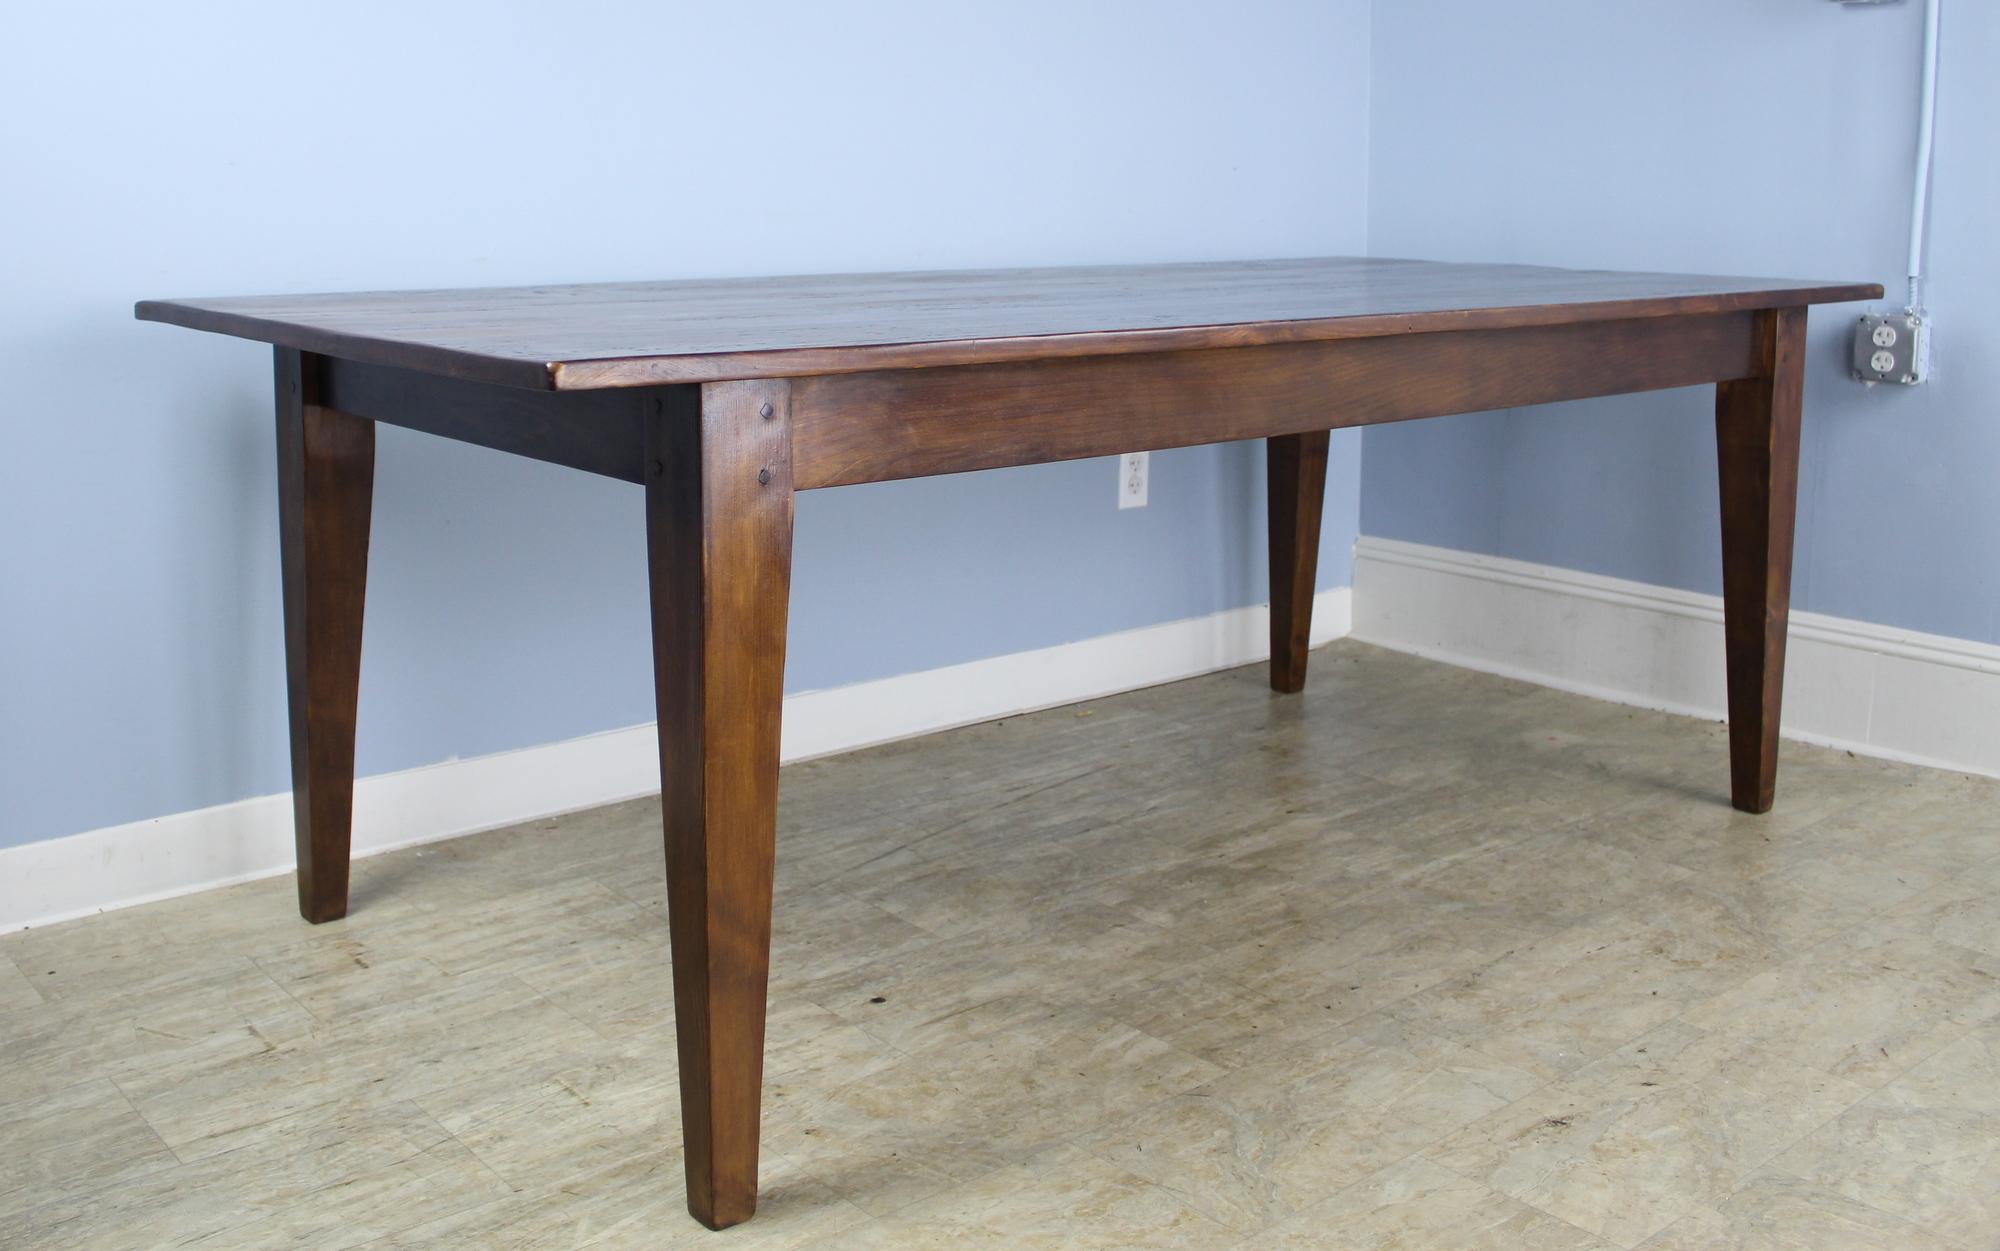 A generously proportioned, thick topped pine farm table in medium walnut 7' with some mild faux distress. With 68 inches between the legs, this table can easily fit eight with room for a Thanksgiving dinner as well! The apron height of 25 inches is